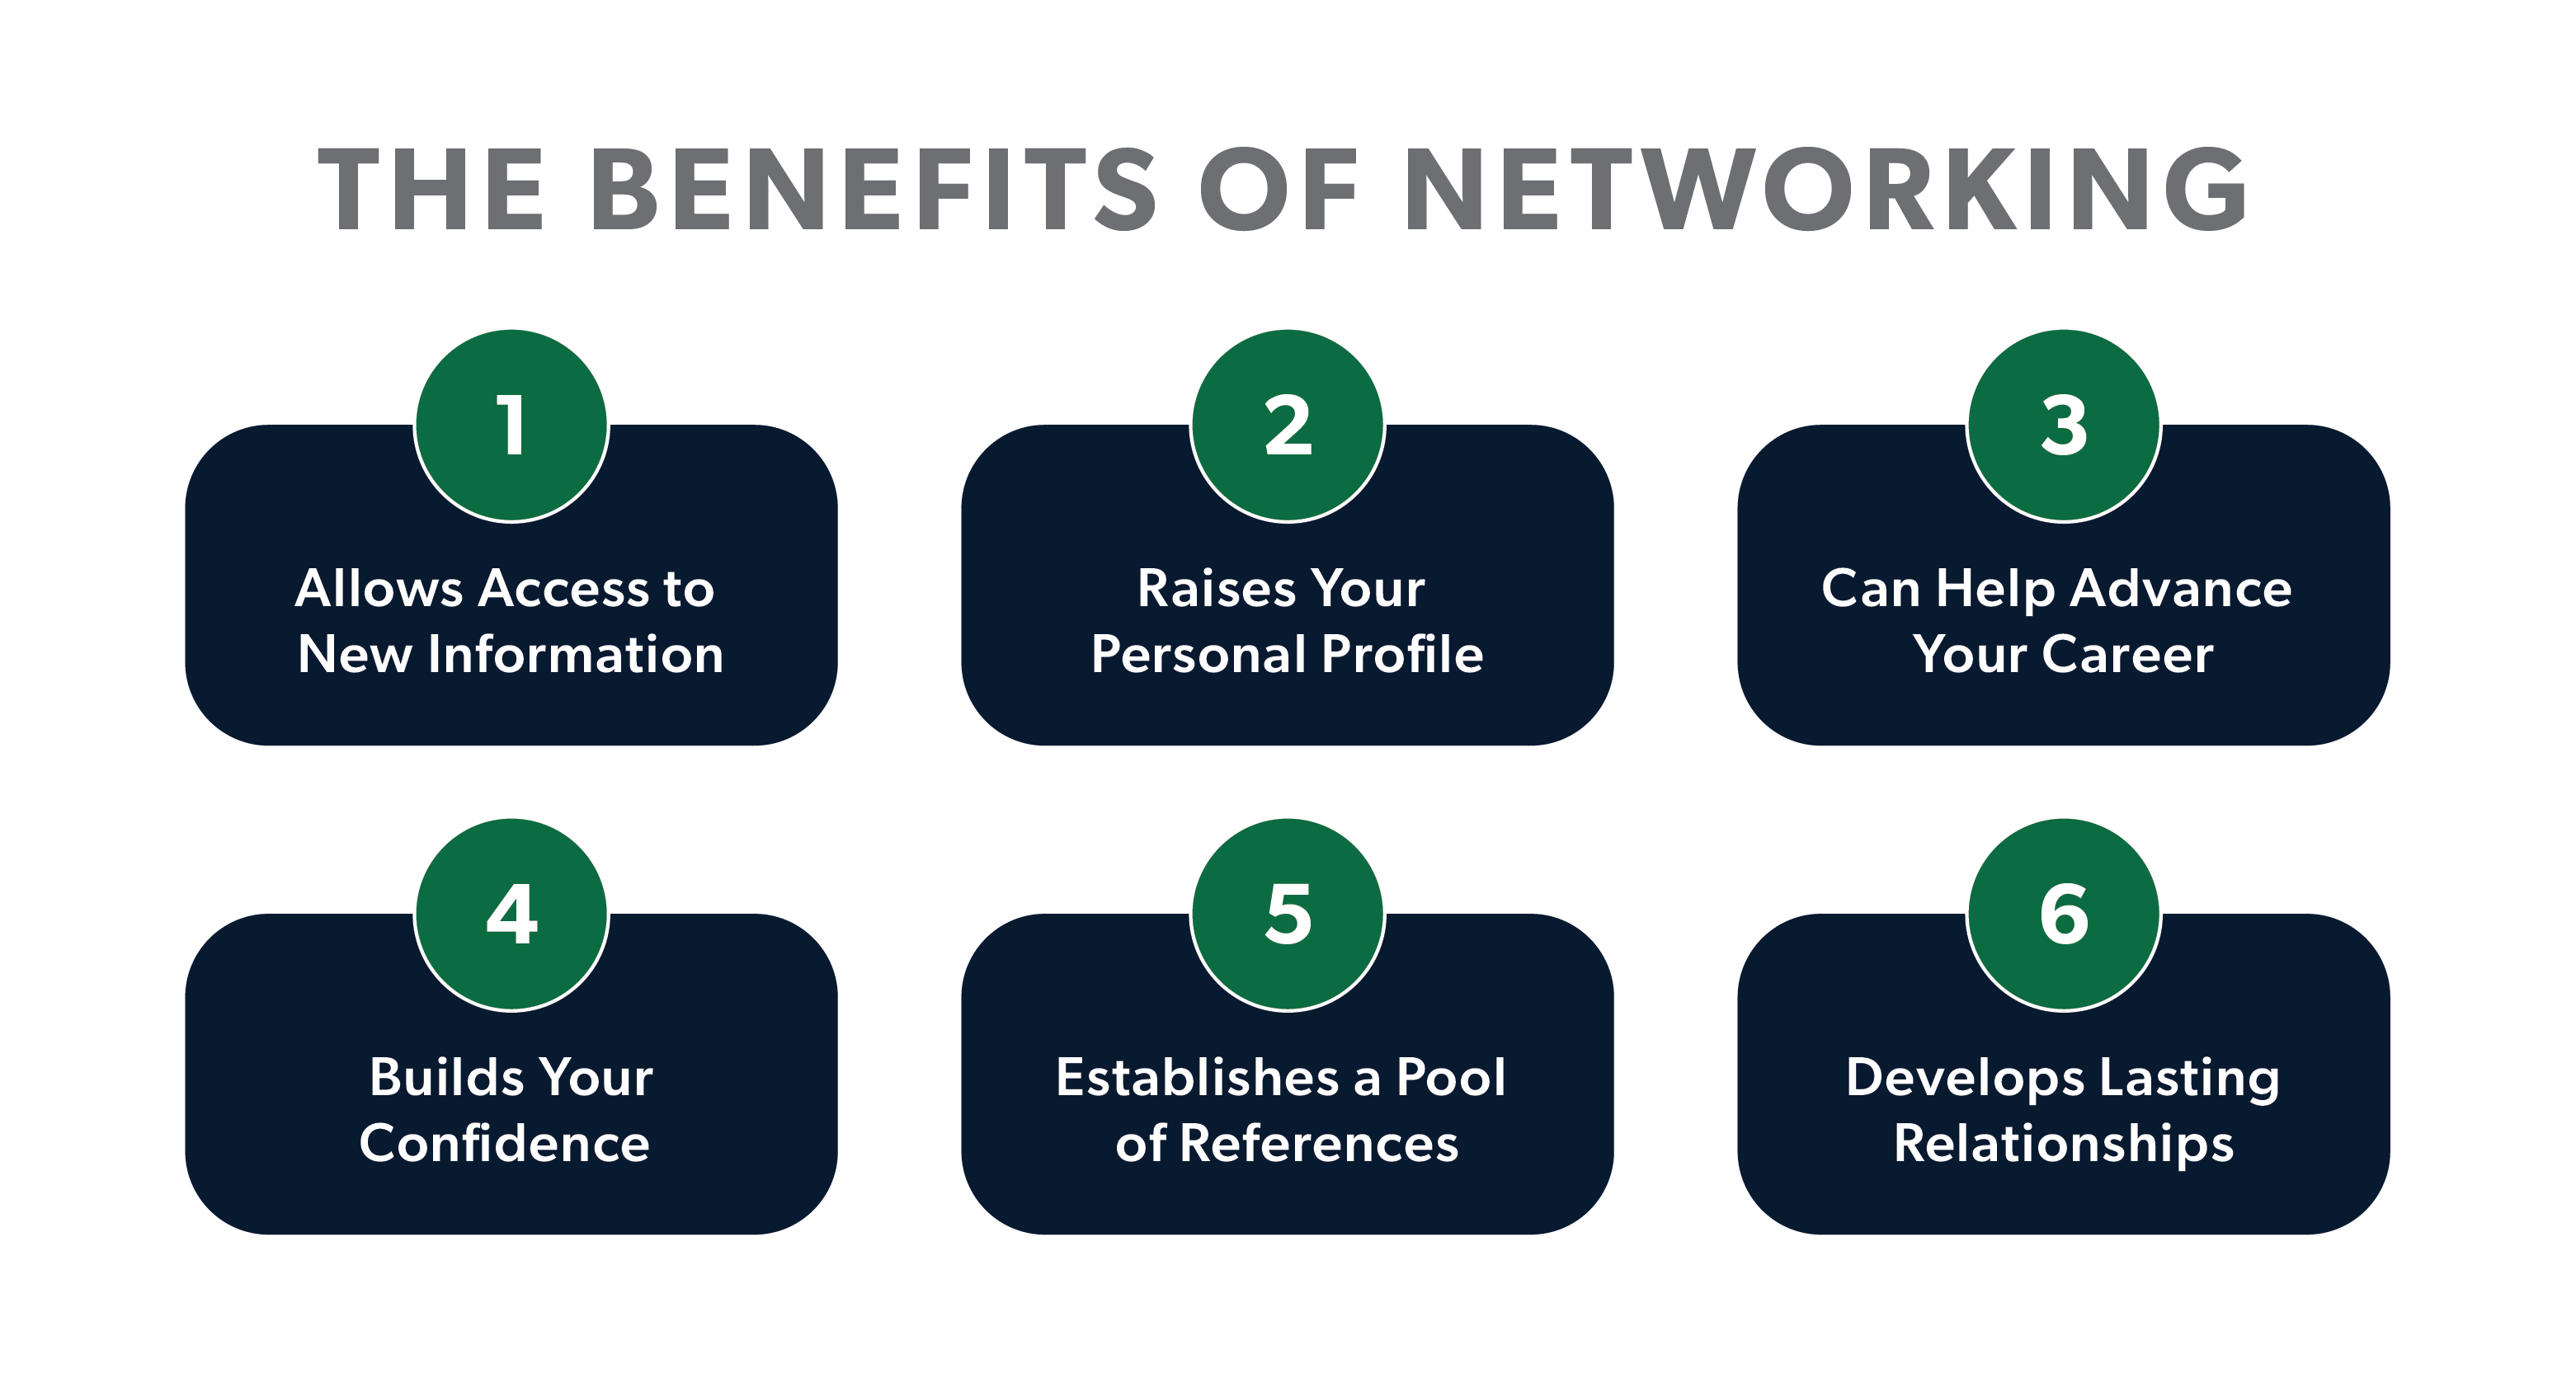 6 Benefits of Networking That Can Help Your Career